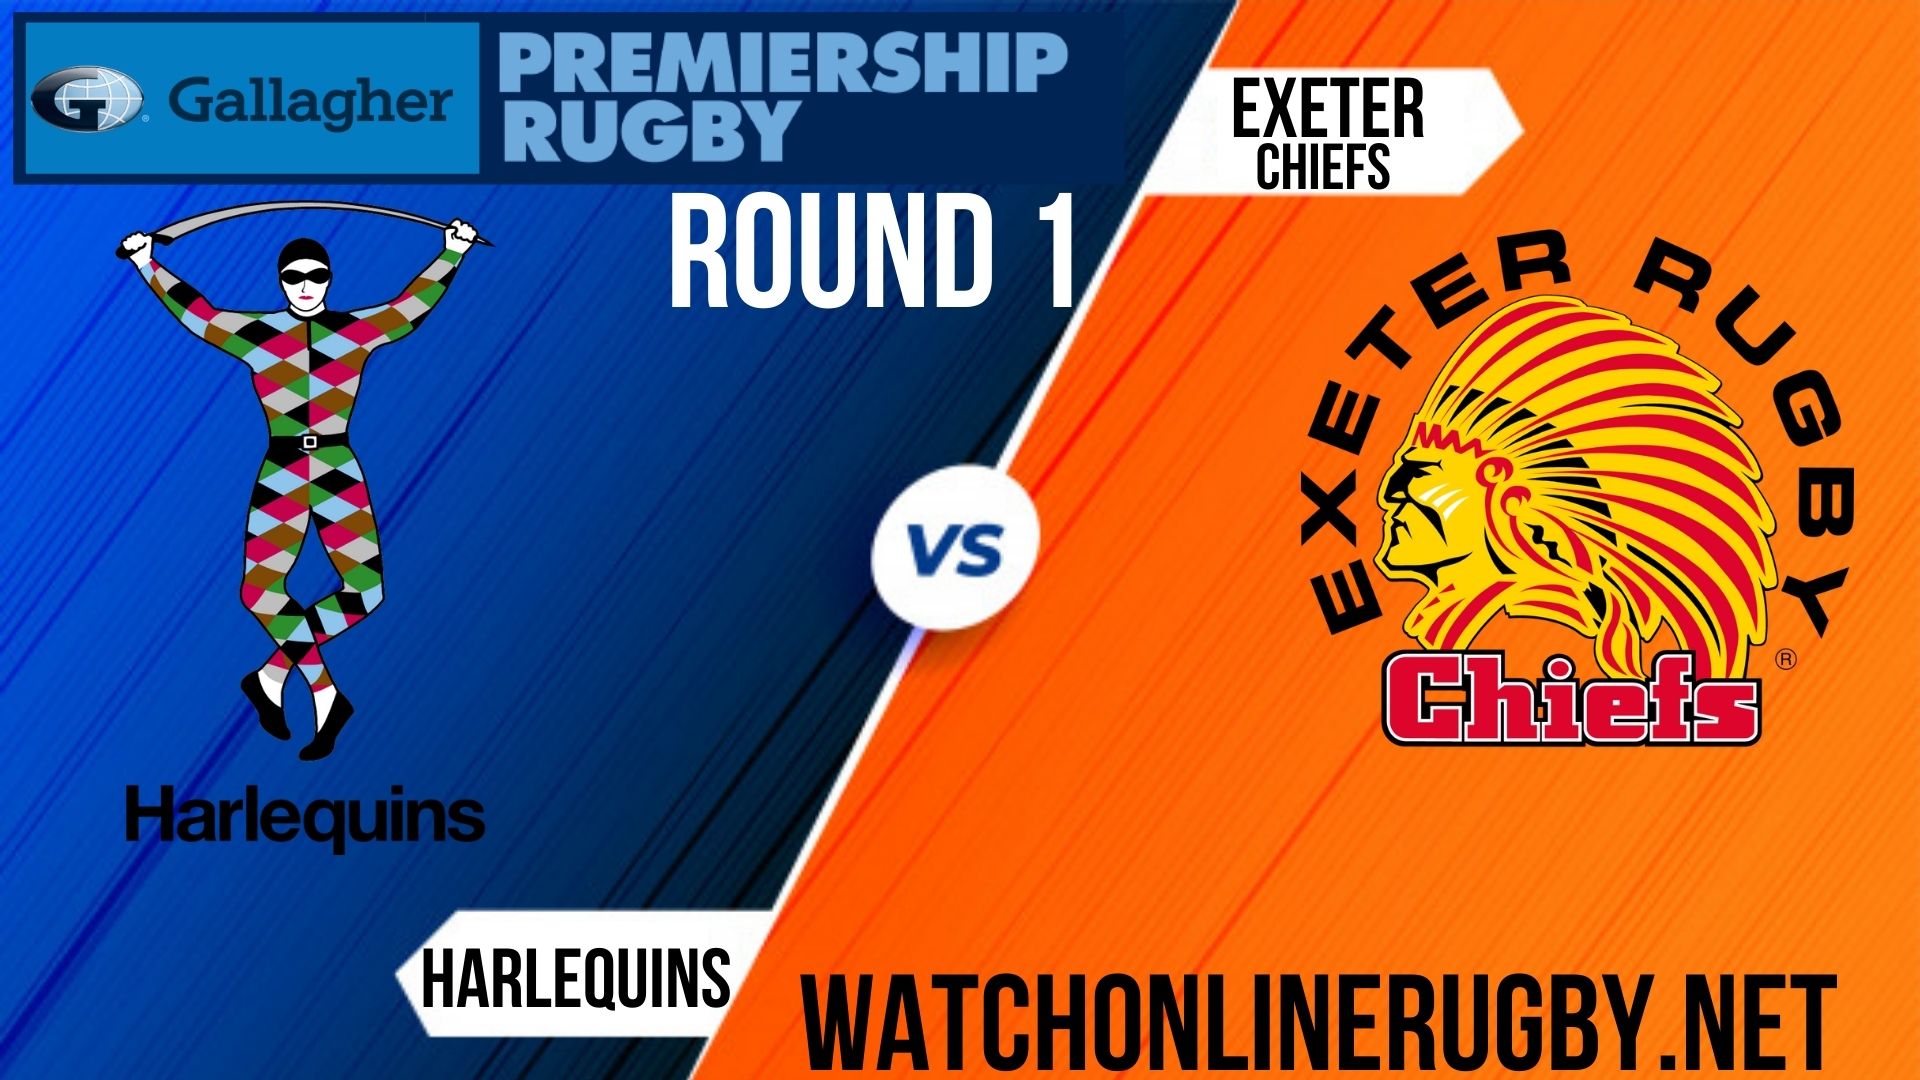 watch-harlequins-vs-exeter-chiefs-live